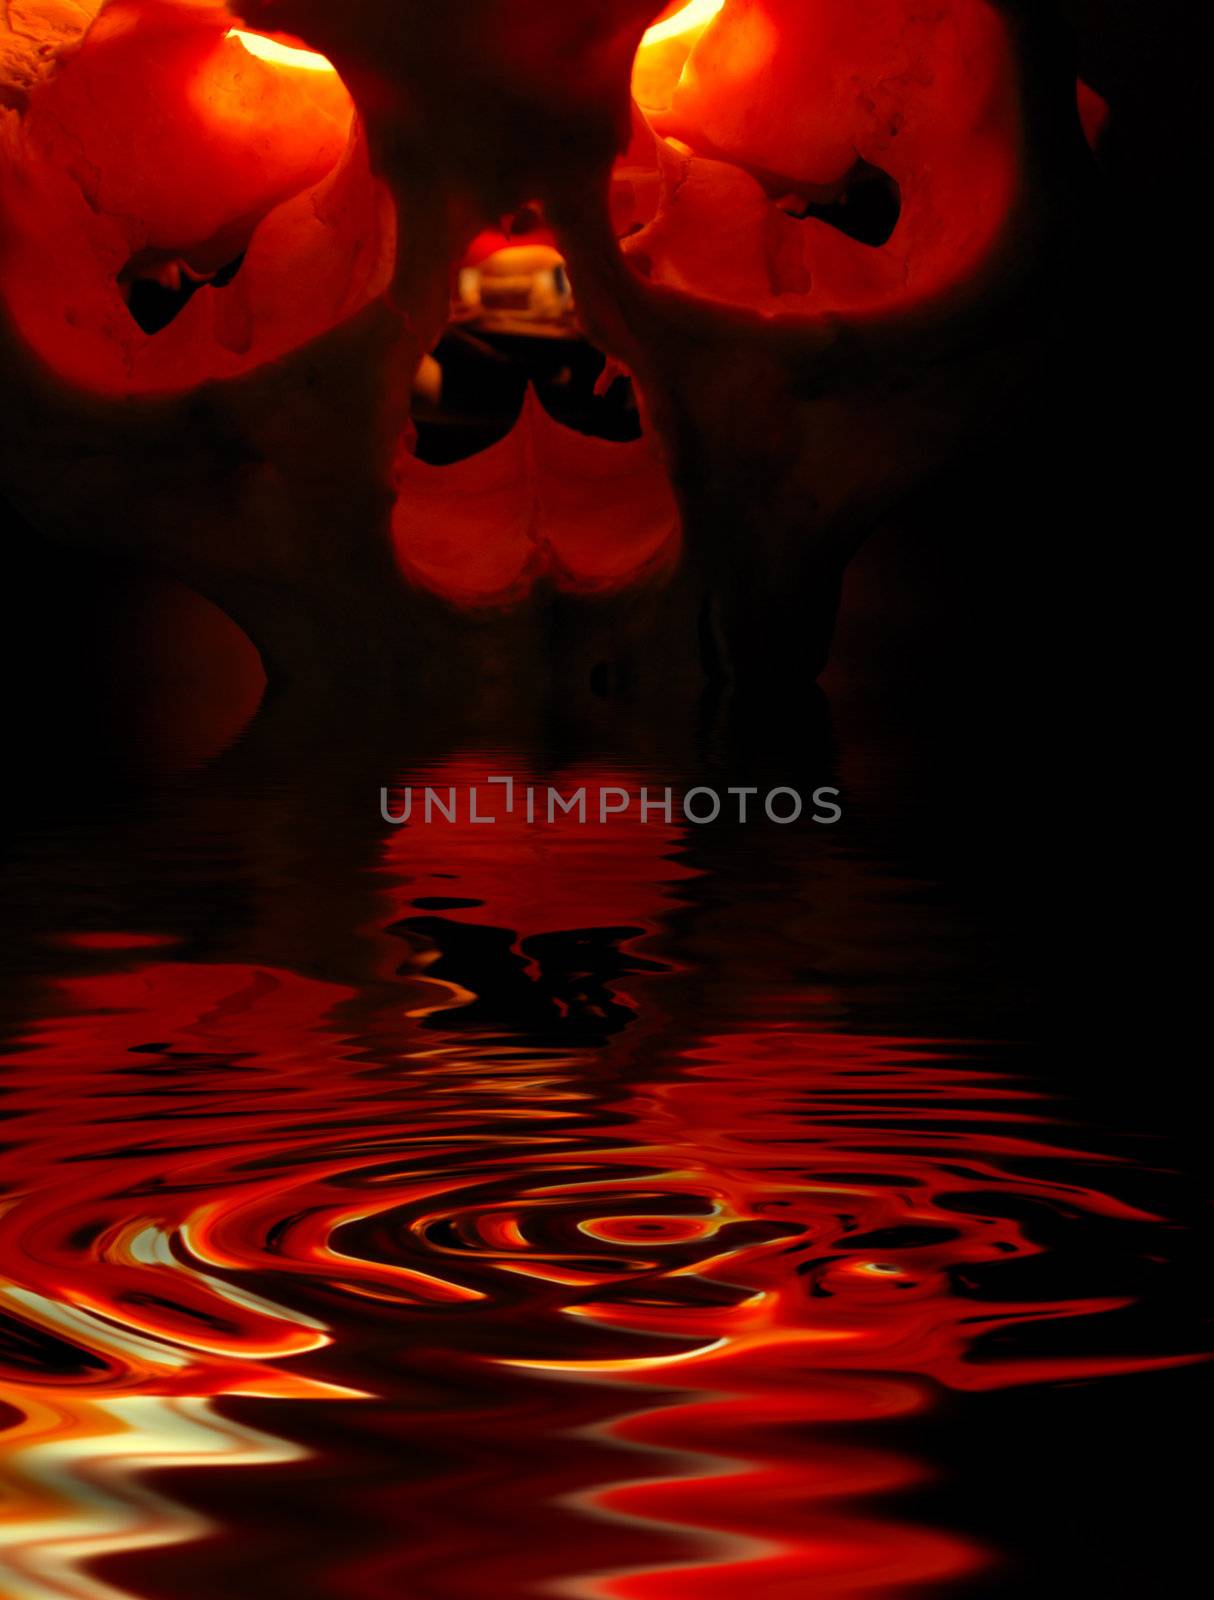 Front of burning skull - old skull against black background and reflections in water